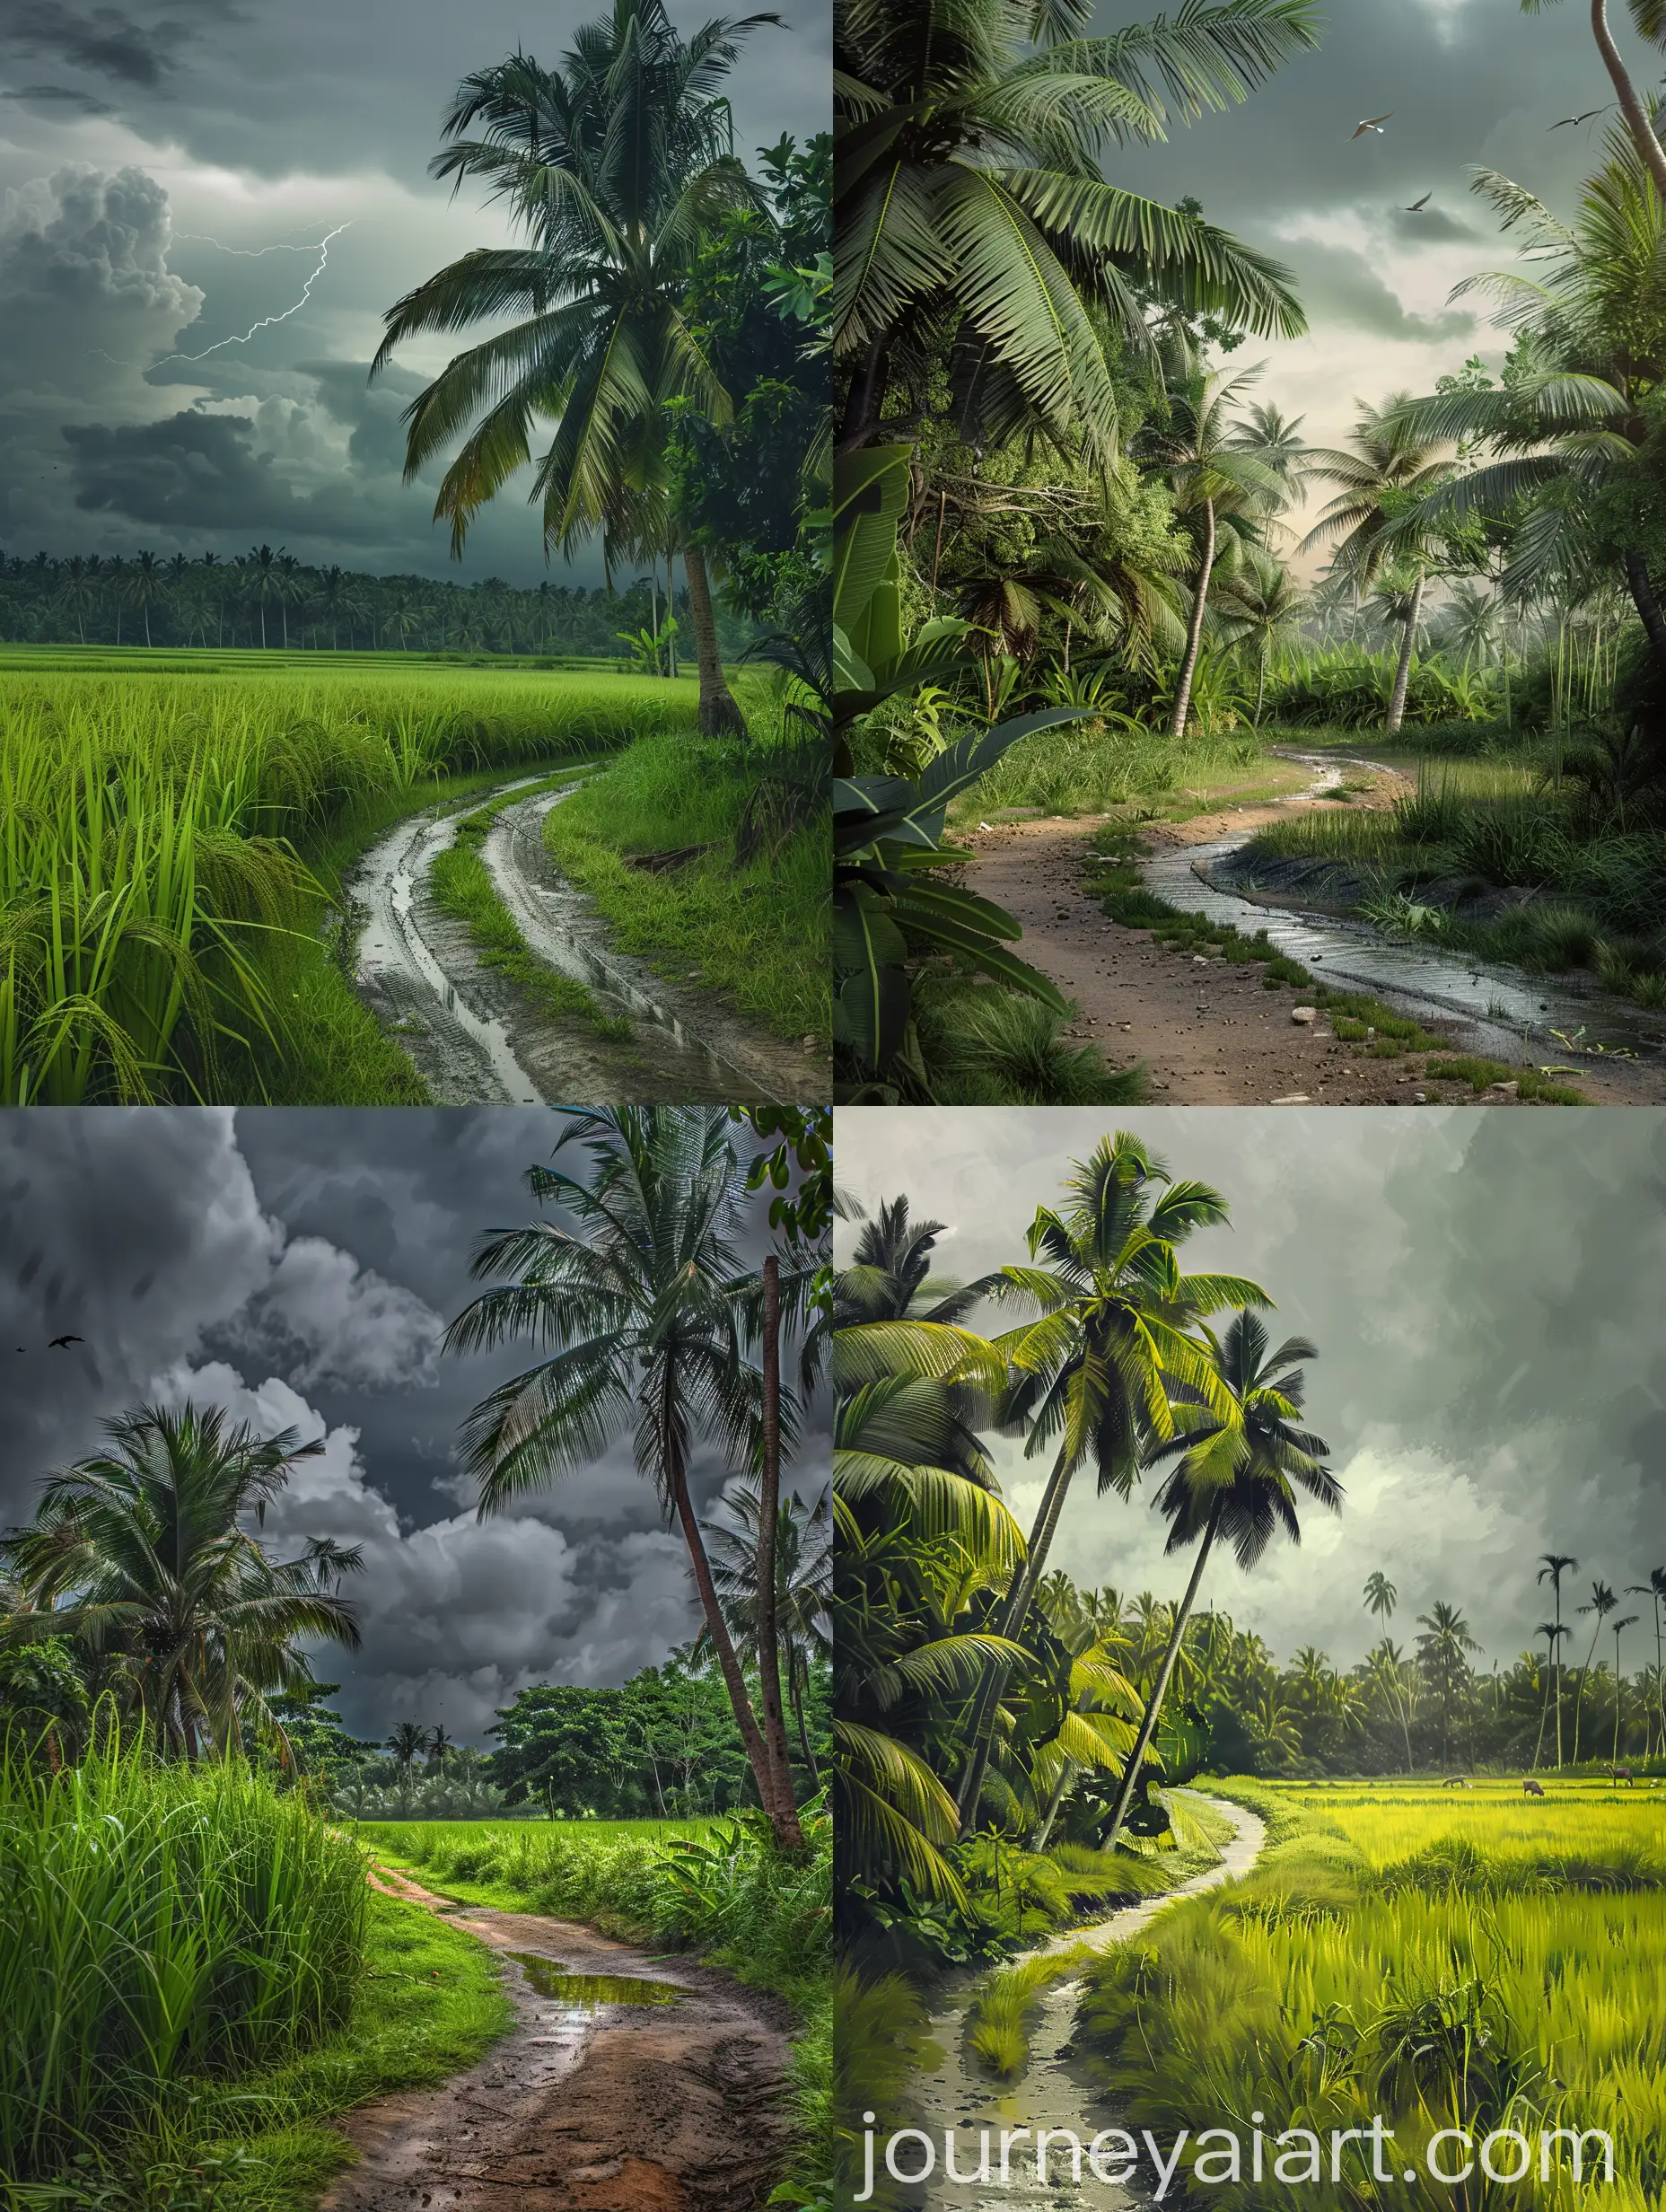 Lush-Green-Paddy-Field-with-Coconut-Trees-and-Flowing-Water